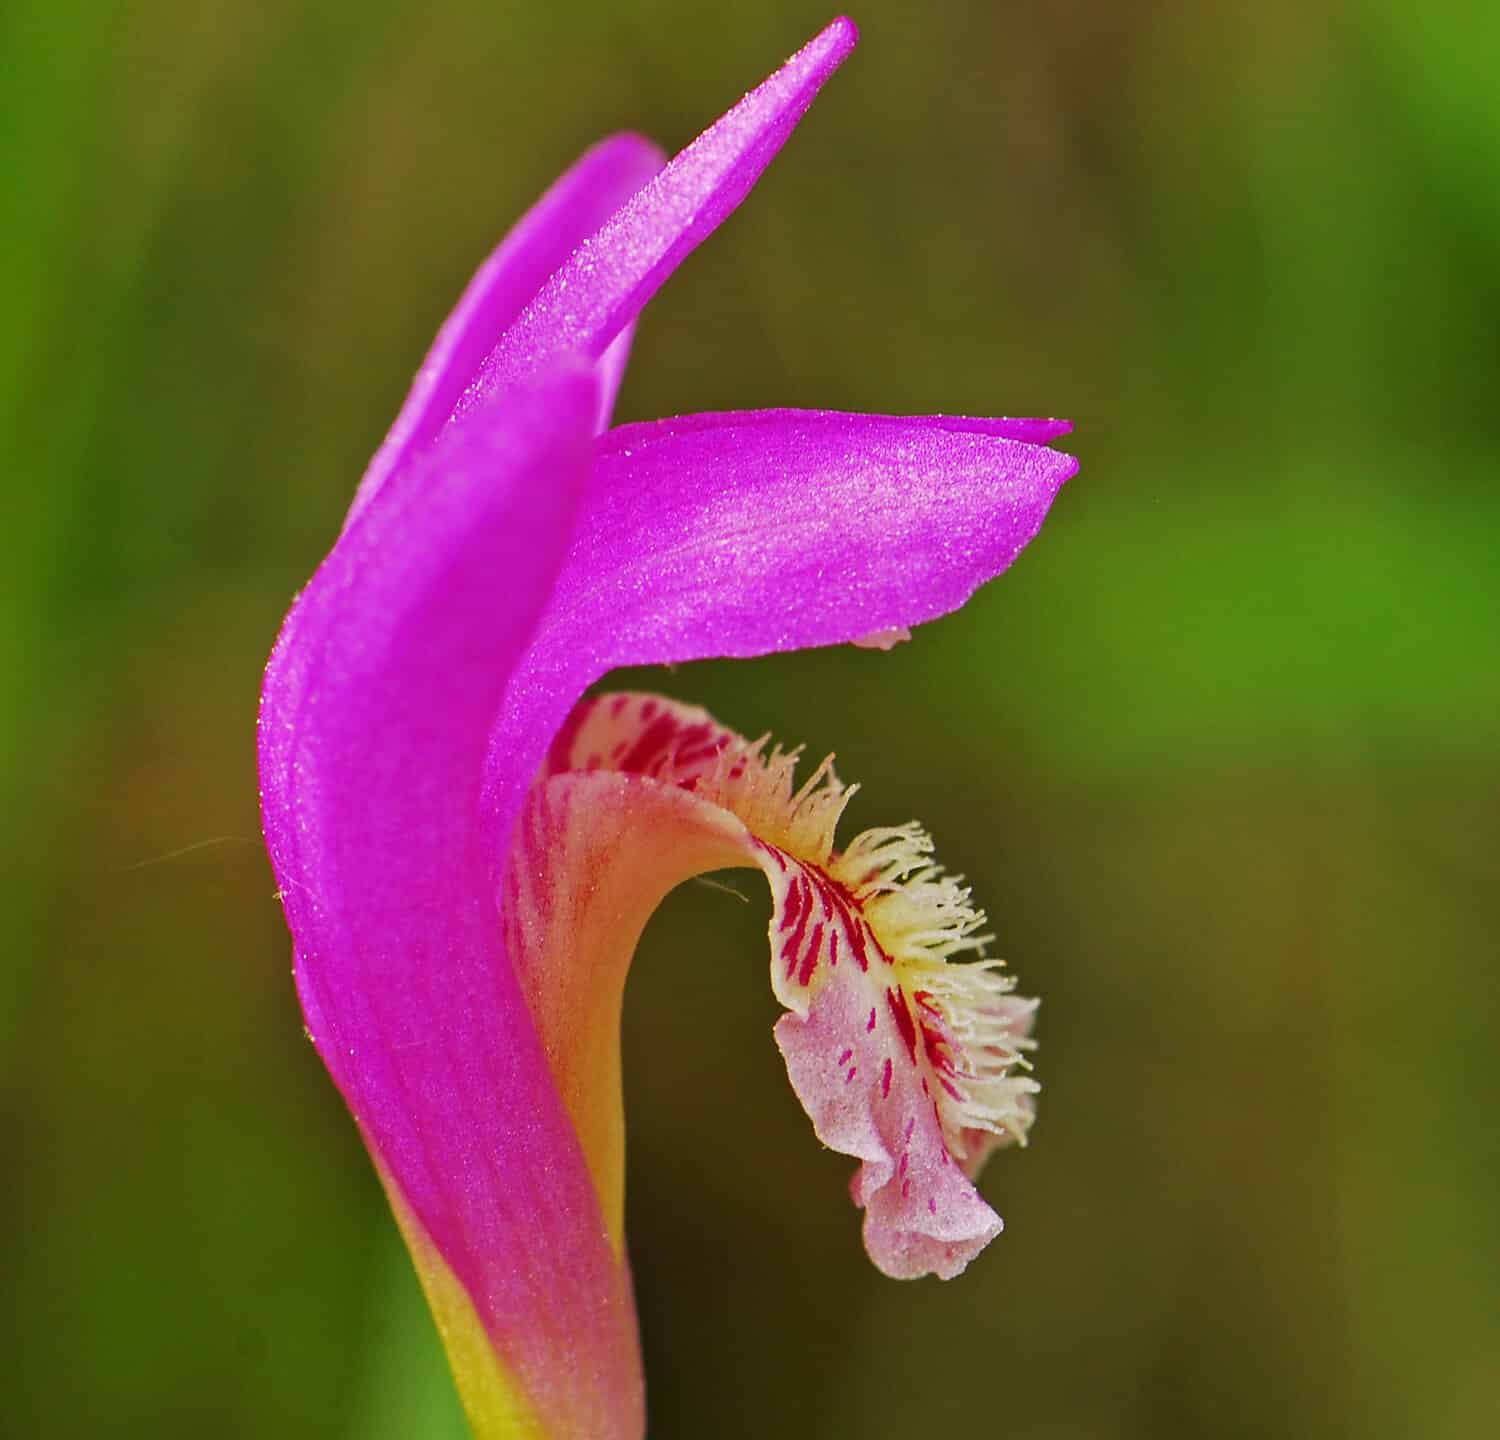 The very rare Dragon's Mouth Orchid, Arethura bulbosa, a wild flower that grows in bogs